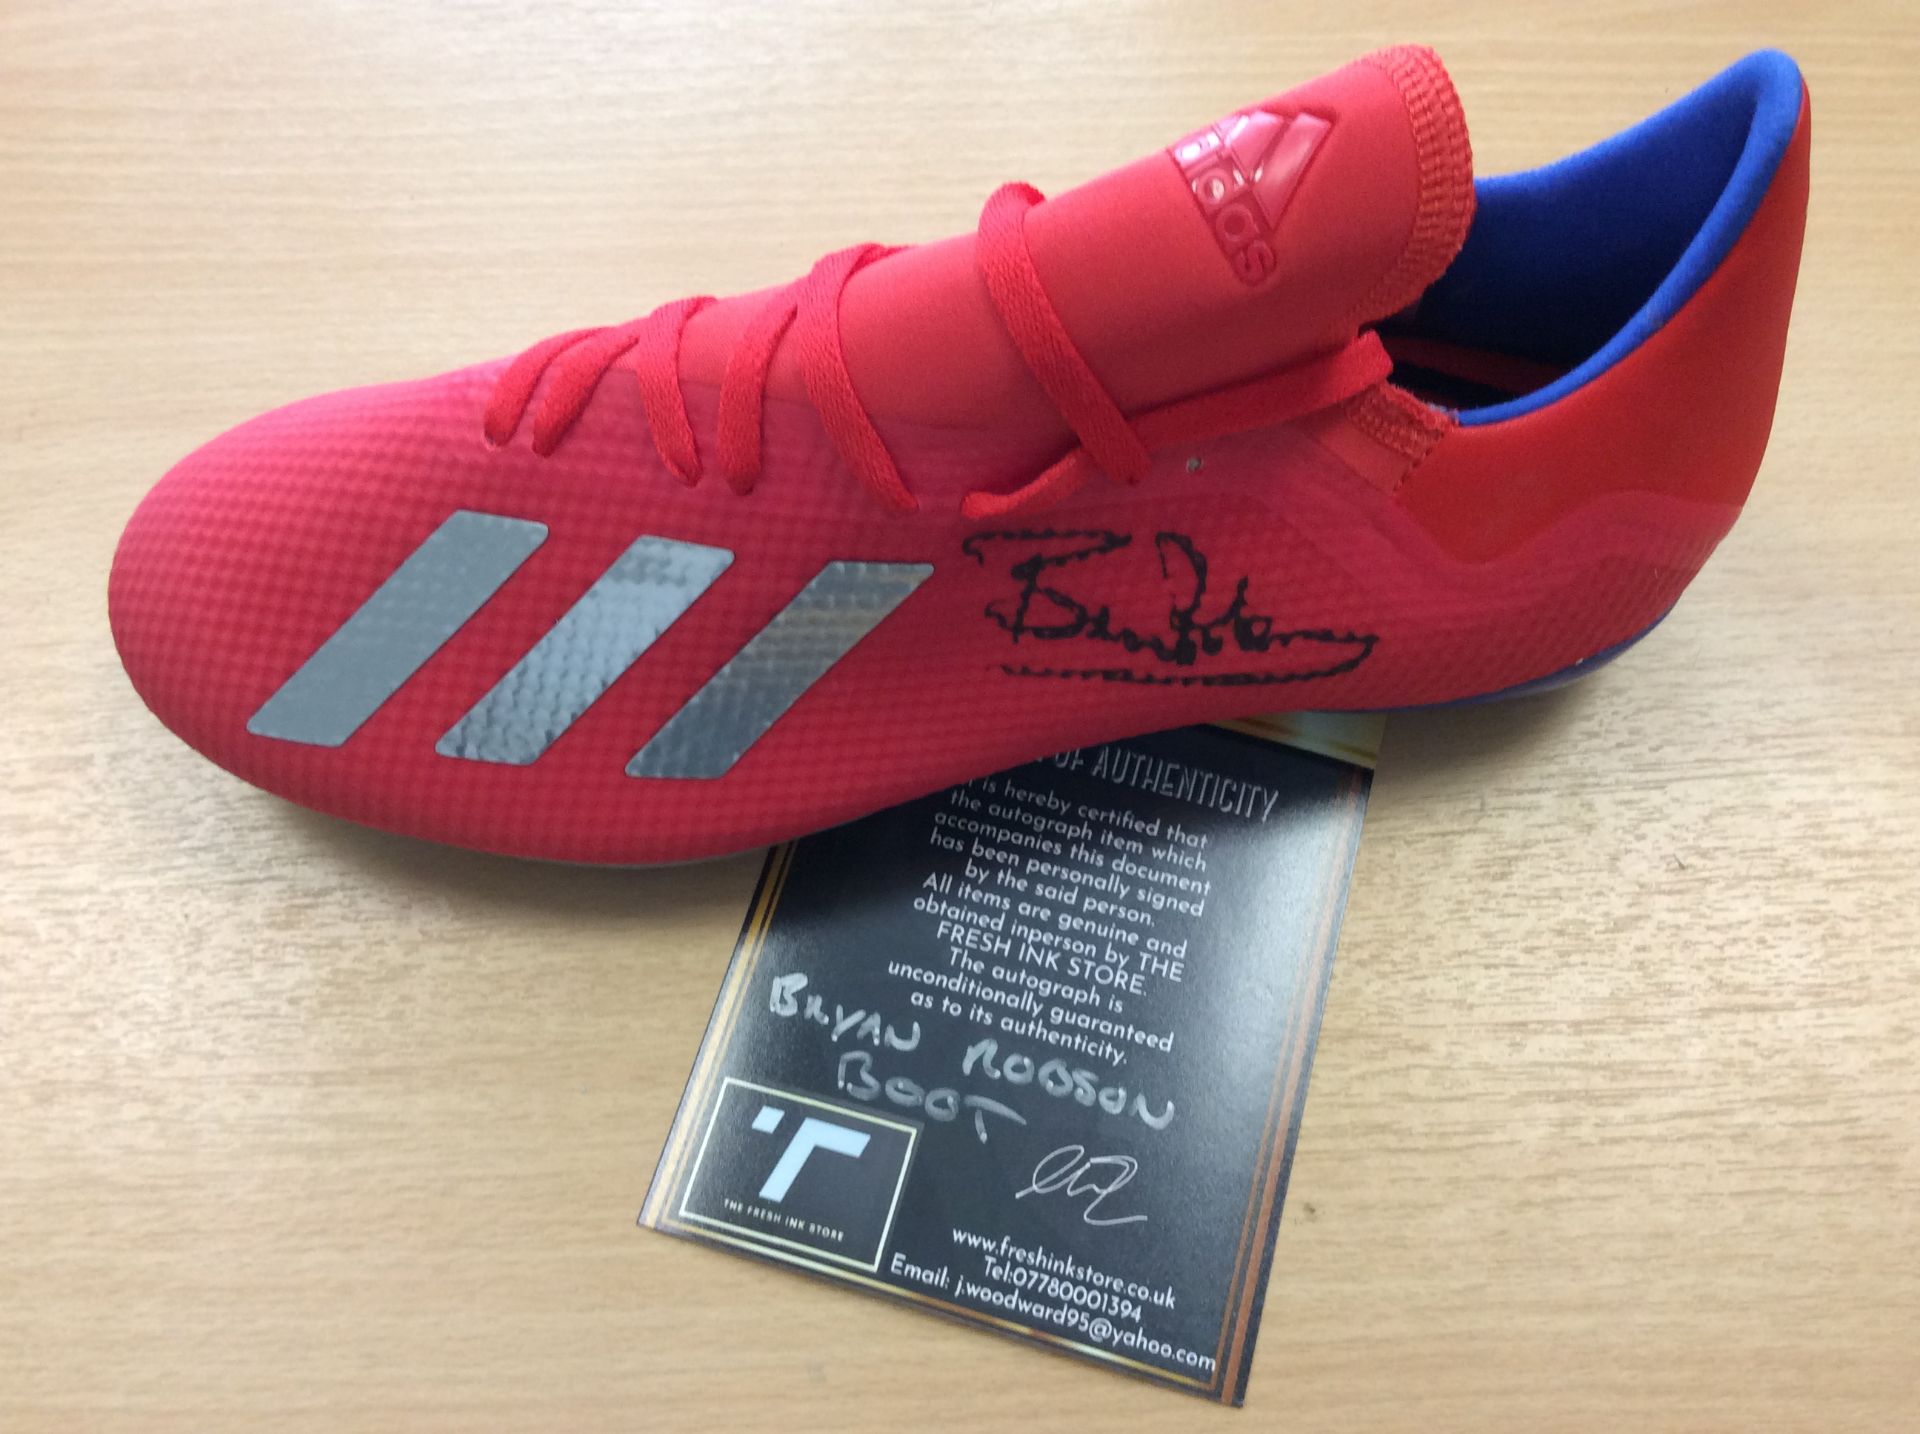 Bryan Robson Signed Football Boot - Image 2 of 2